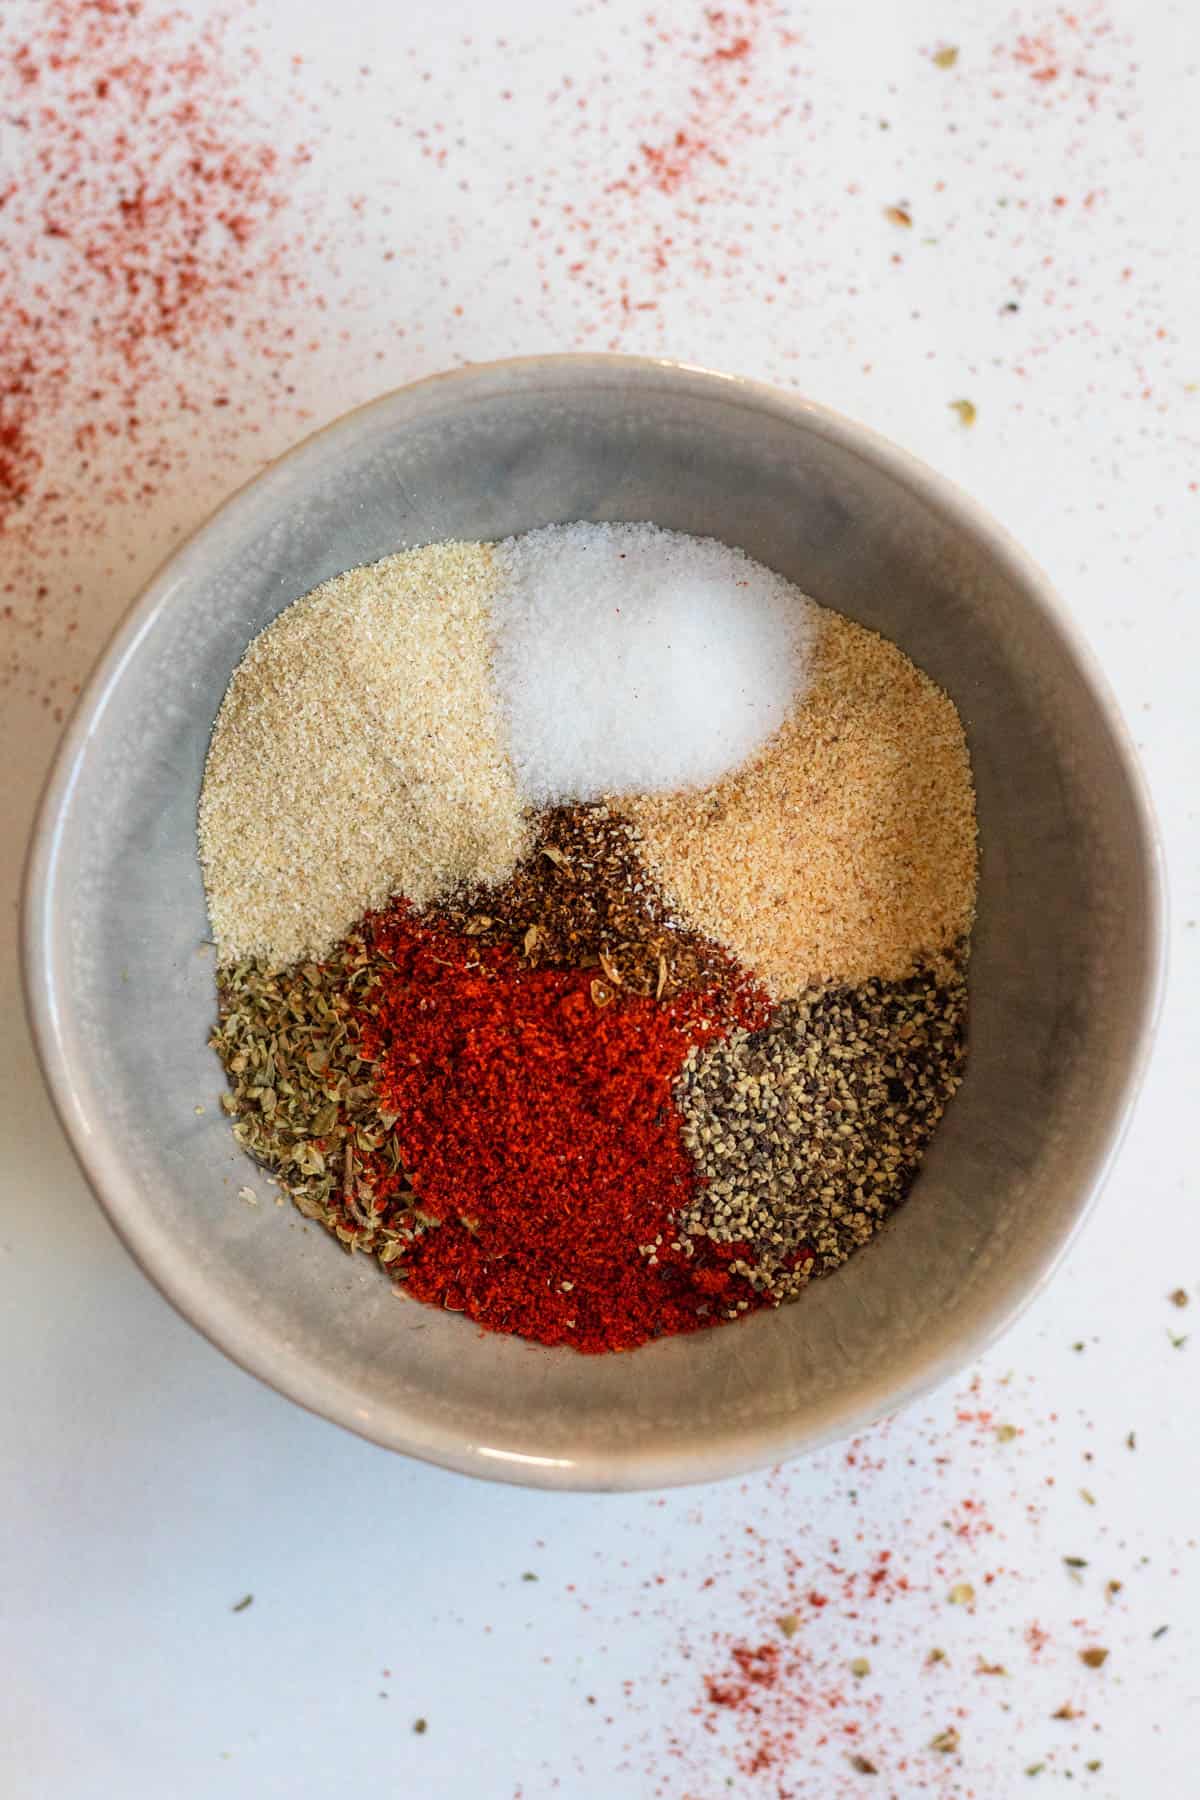 Mexican seasoning blend in a small round bowl with a light colored background